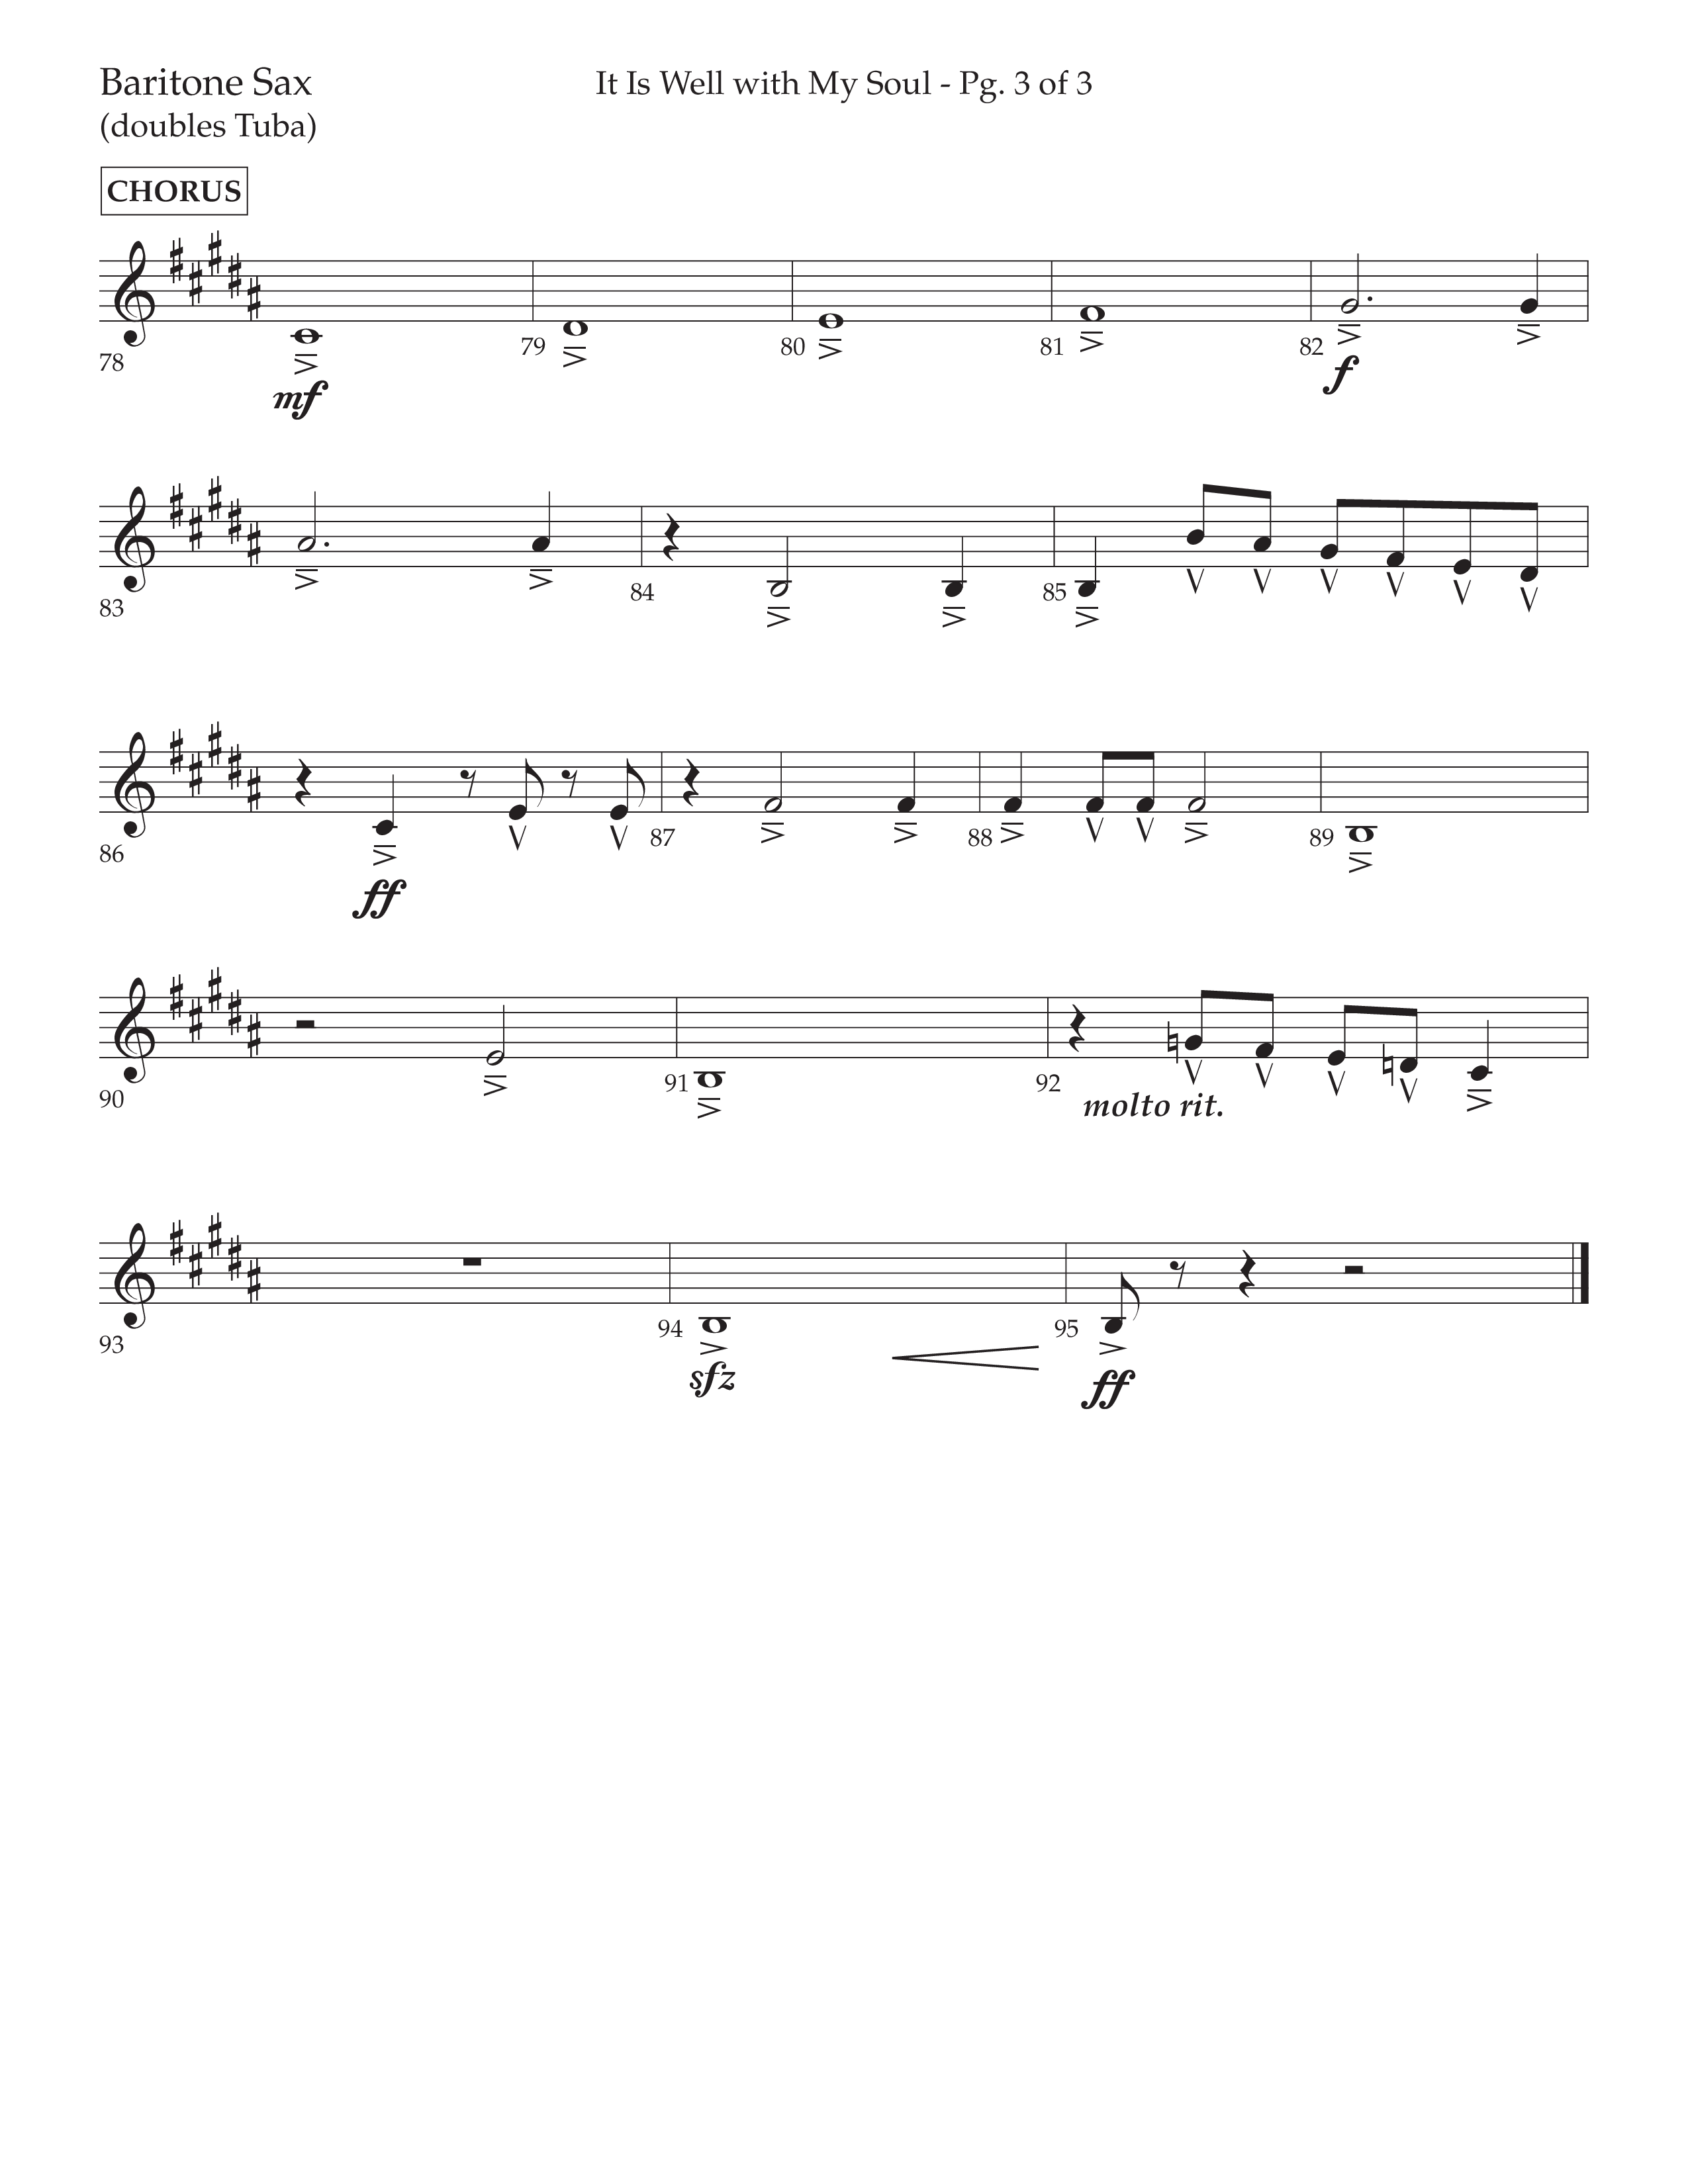 It Is Well With My Soul (Choral Anthem SATB) Bari Sax (Lifeway Choral / Arr. John Bolin / Orch. David Clydesdale)